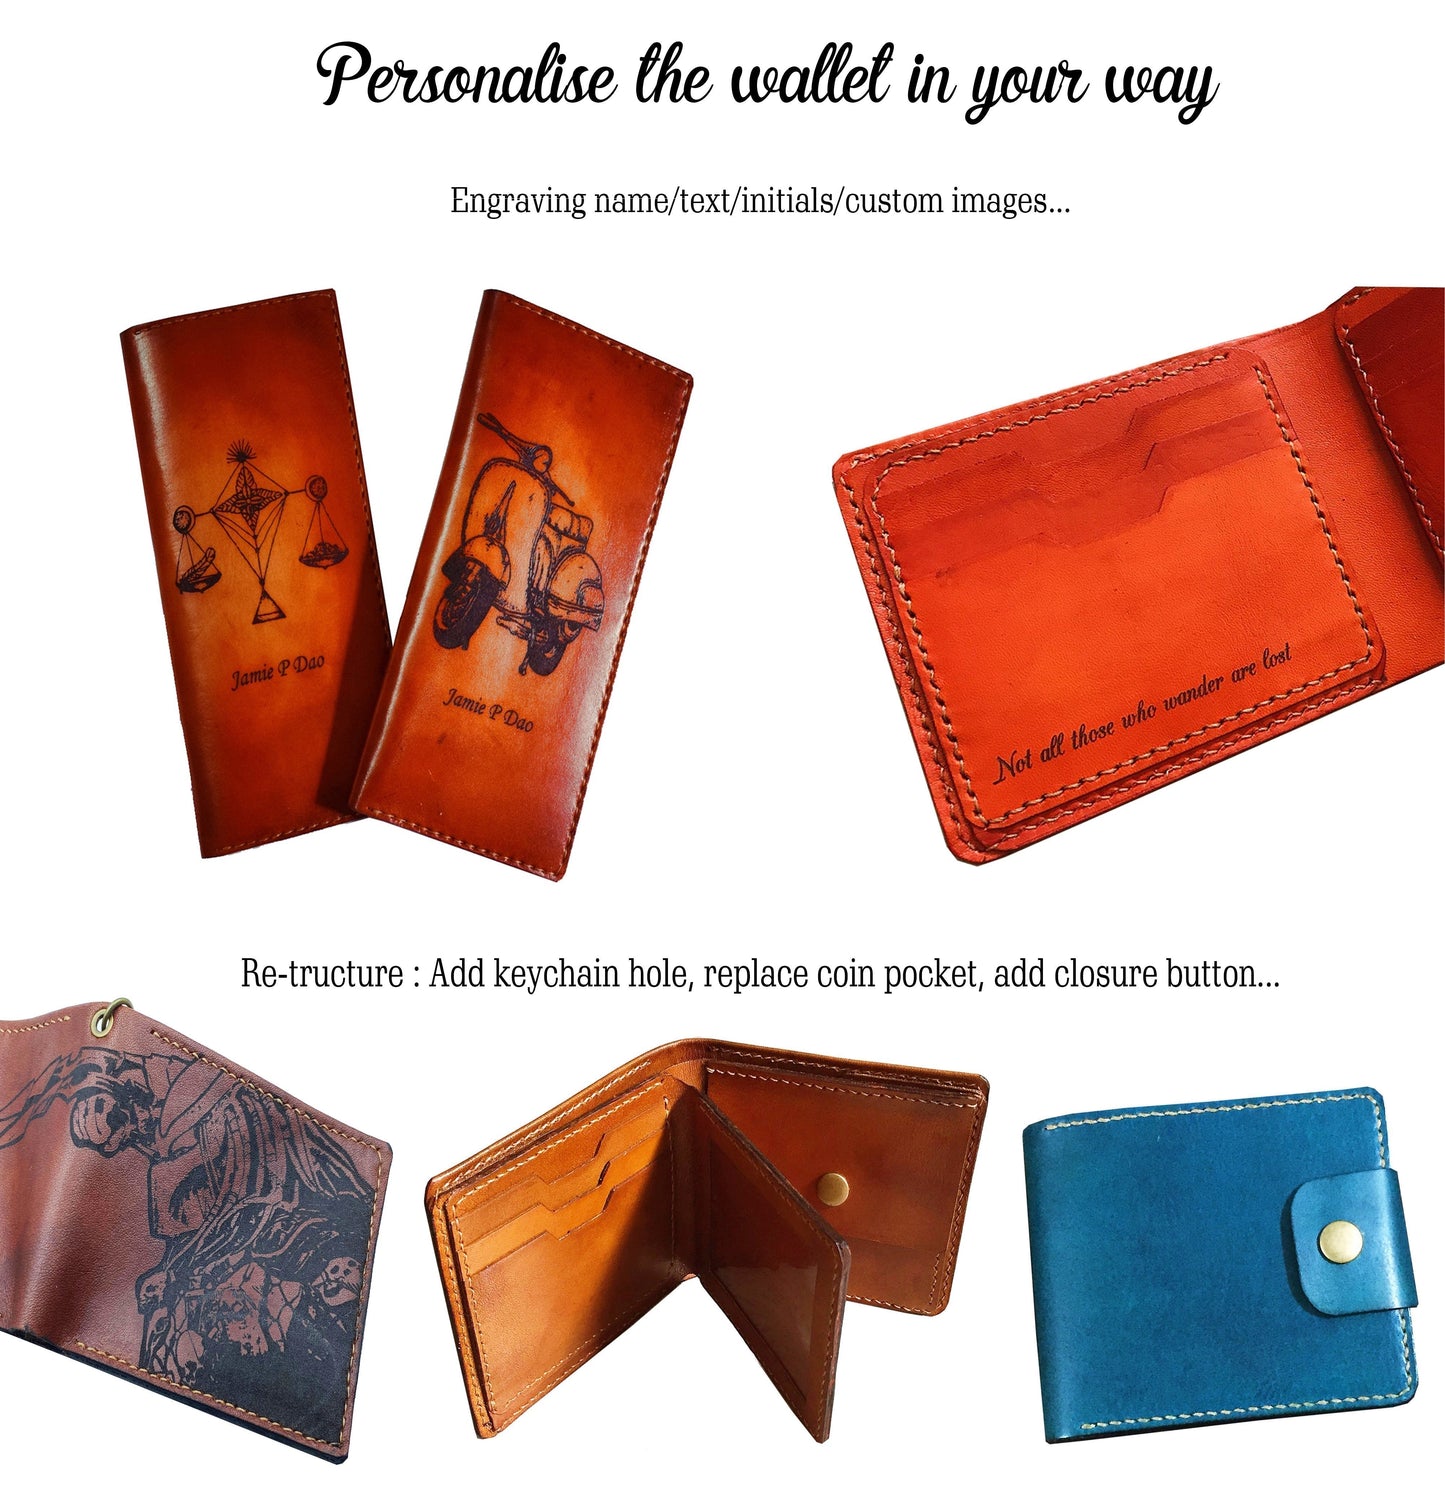 Customized Starwars art wallet, genuine leather bifold wallet, wallet for dad, starwars fan wallet, gift for him